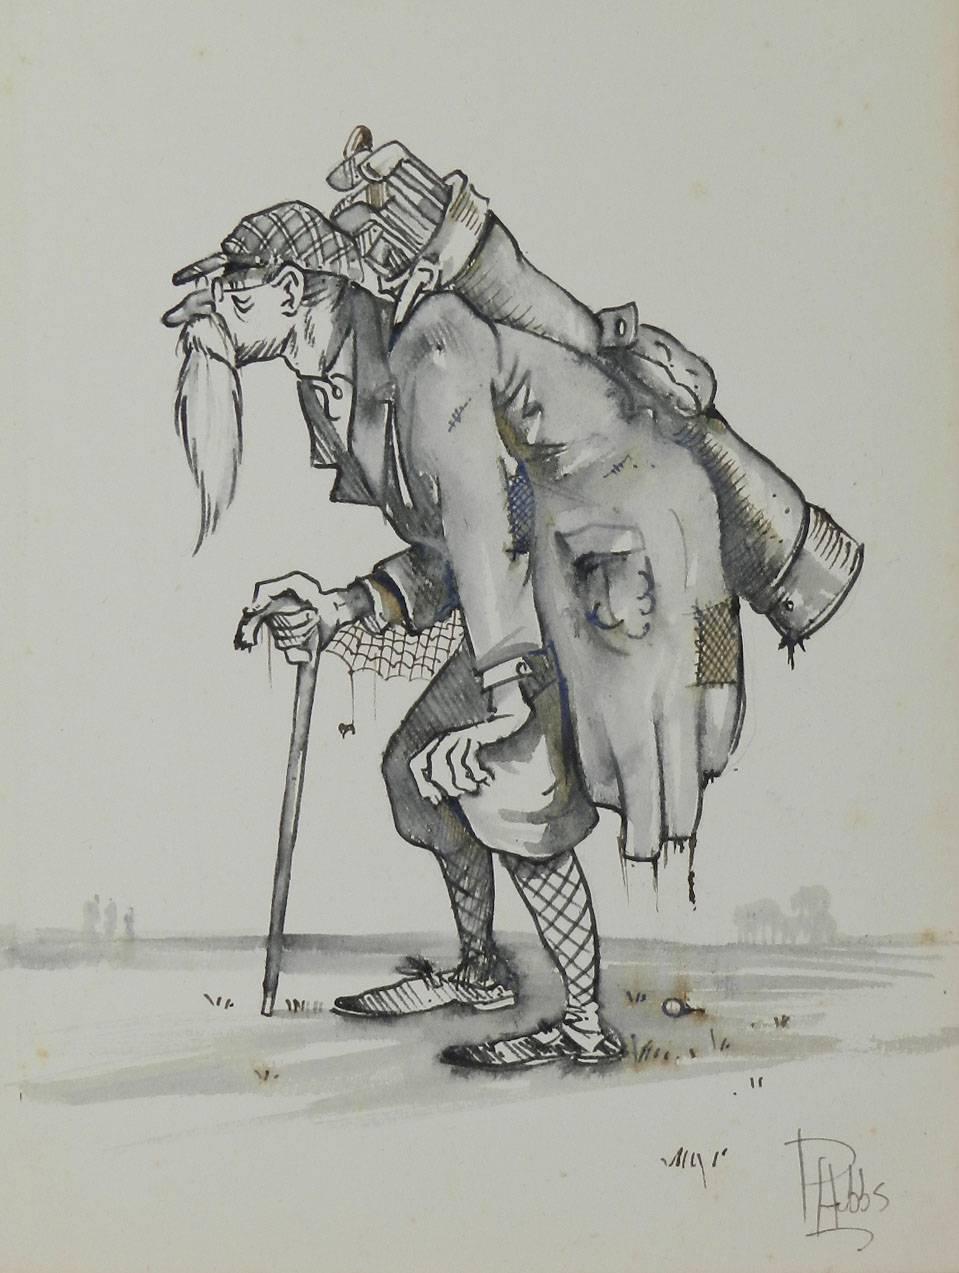 Amusing original sketch caricature of a Golfer
From a series of golf caricatures by the UK artist Peter Hobbs, 1930-1994.
Peter Hobbs was a professional sports caricaturist
An Elderly Gentleman man playing golf in Plus Fours complete with Spider and